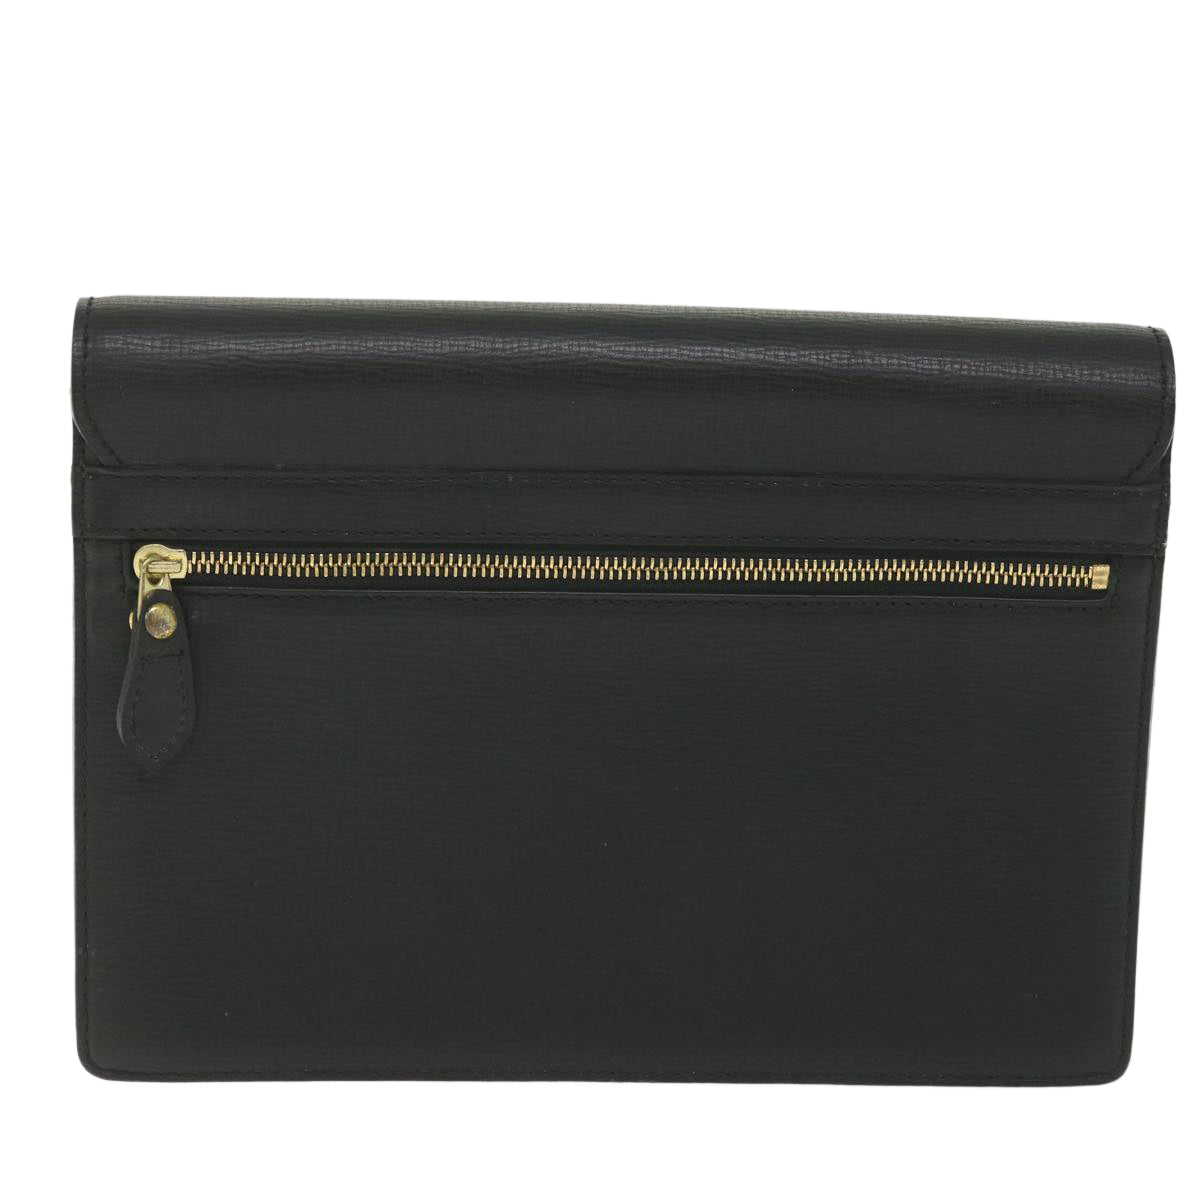 Burberrys Clutch Bag Leather Black Auth bs10055 - 0